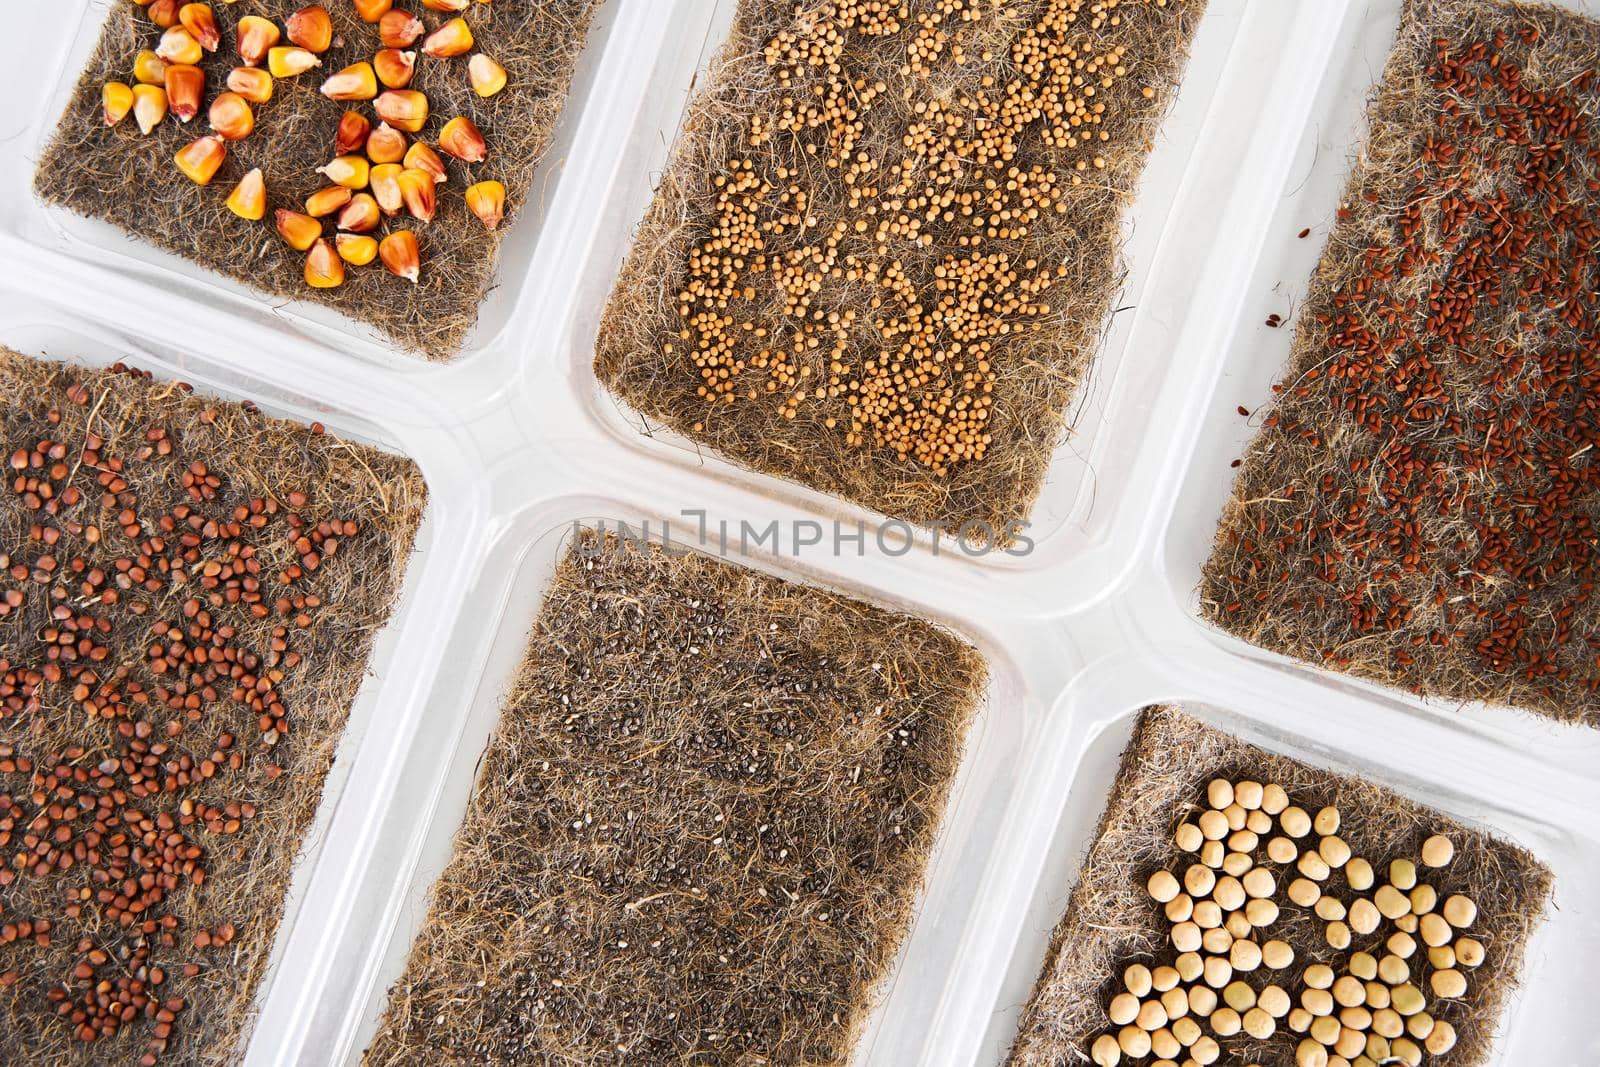 Microgreen seeds sorted in plastic boxes. Home eco greenery.